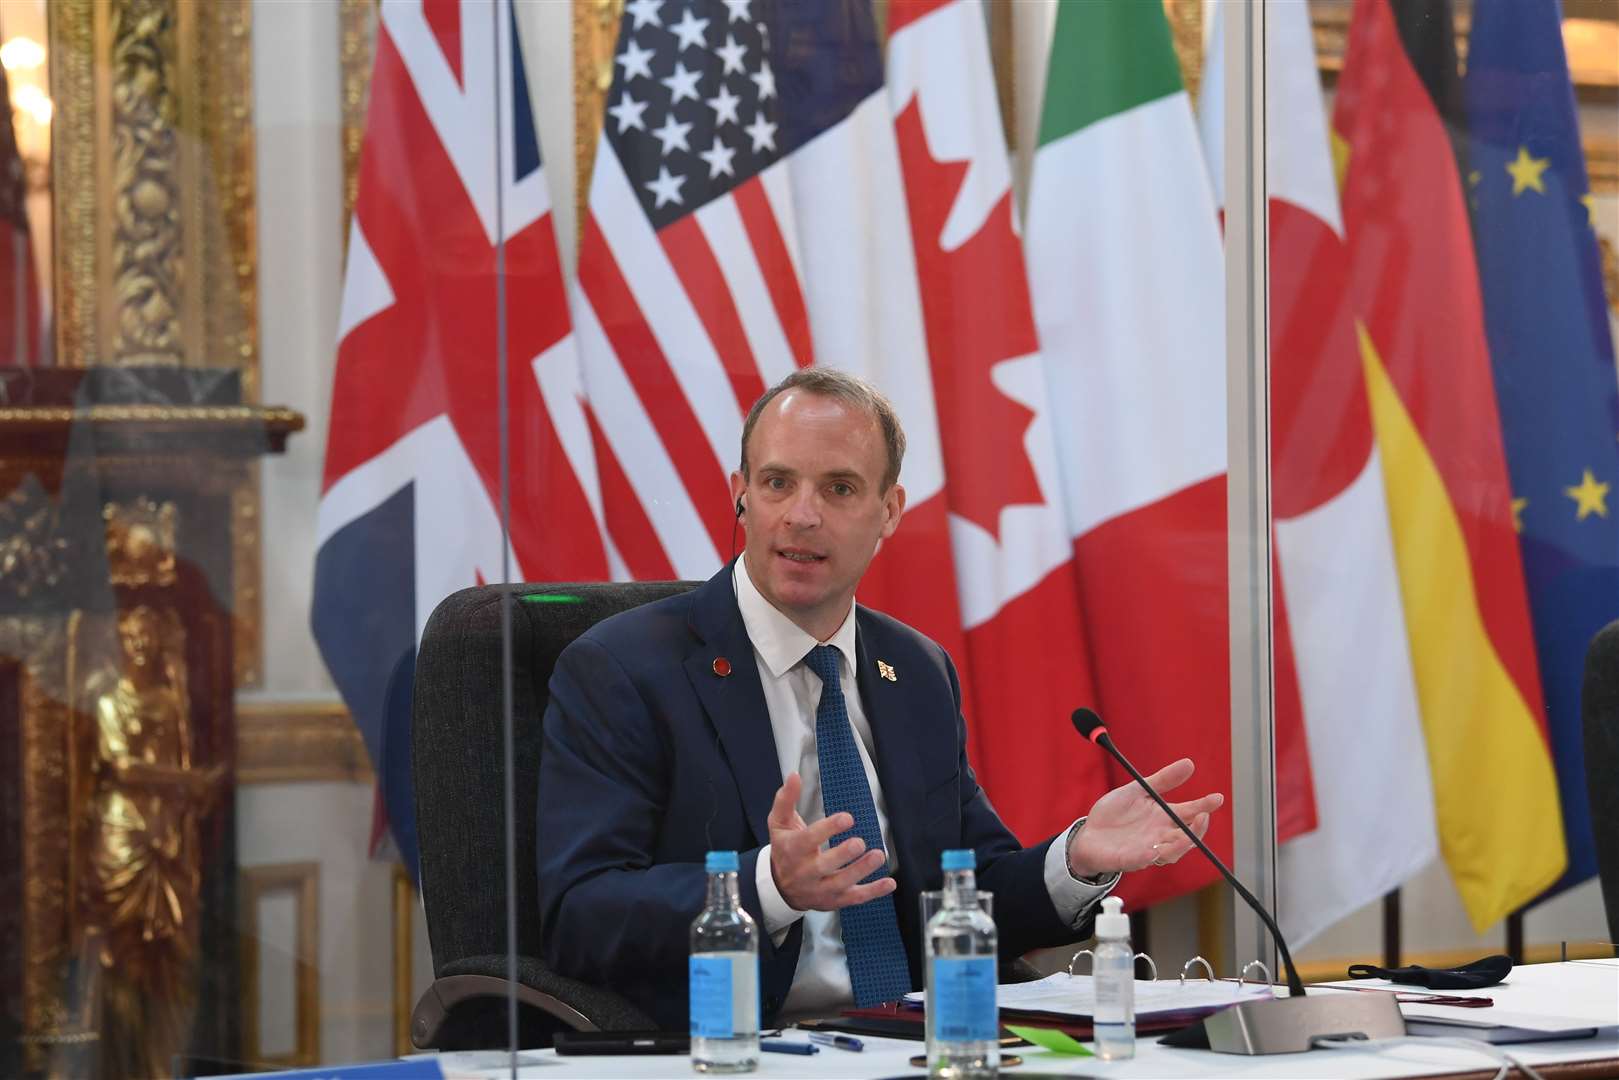 Foreign Secretary Dominic Raab during talks at the G7 meeting at Lancaster House in London (Stefan Rousseau/PA)